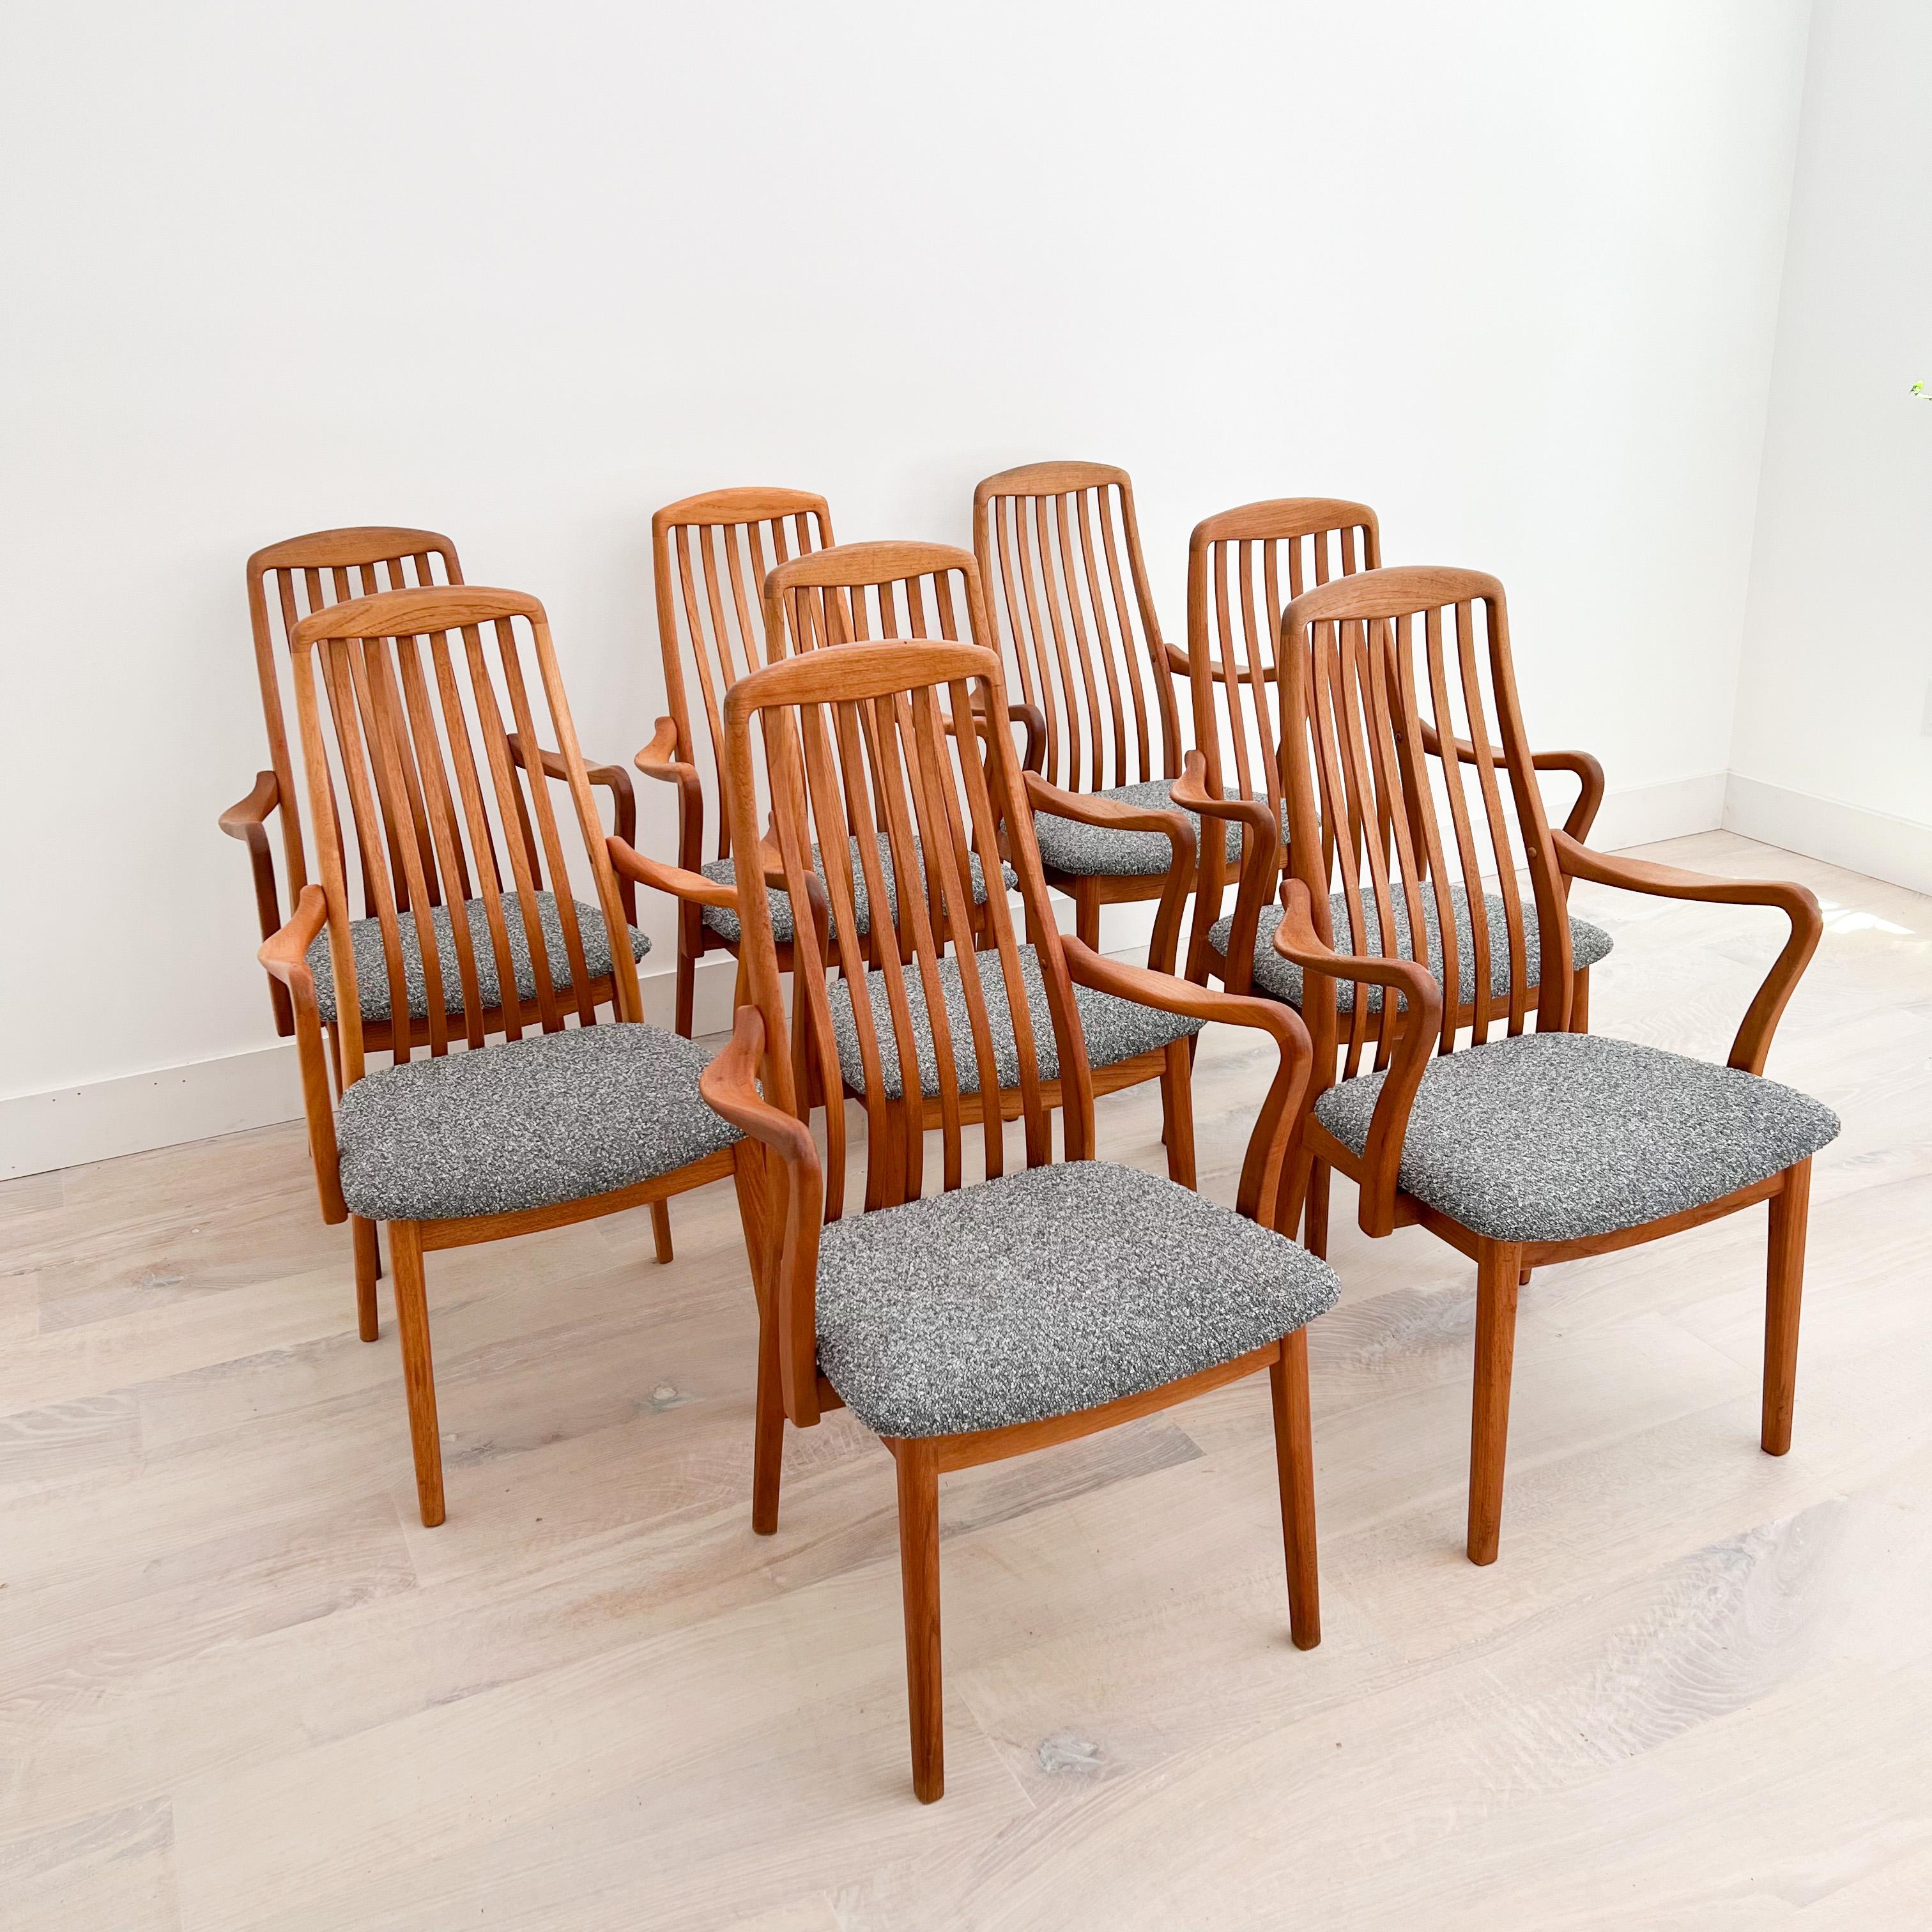 Mid-Century Modern Set of 8 Danish Teak Dining Chairs with New Upholstery by Virsidan A/S